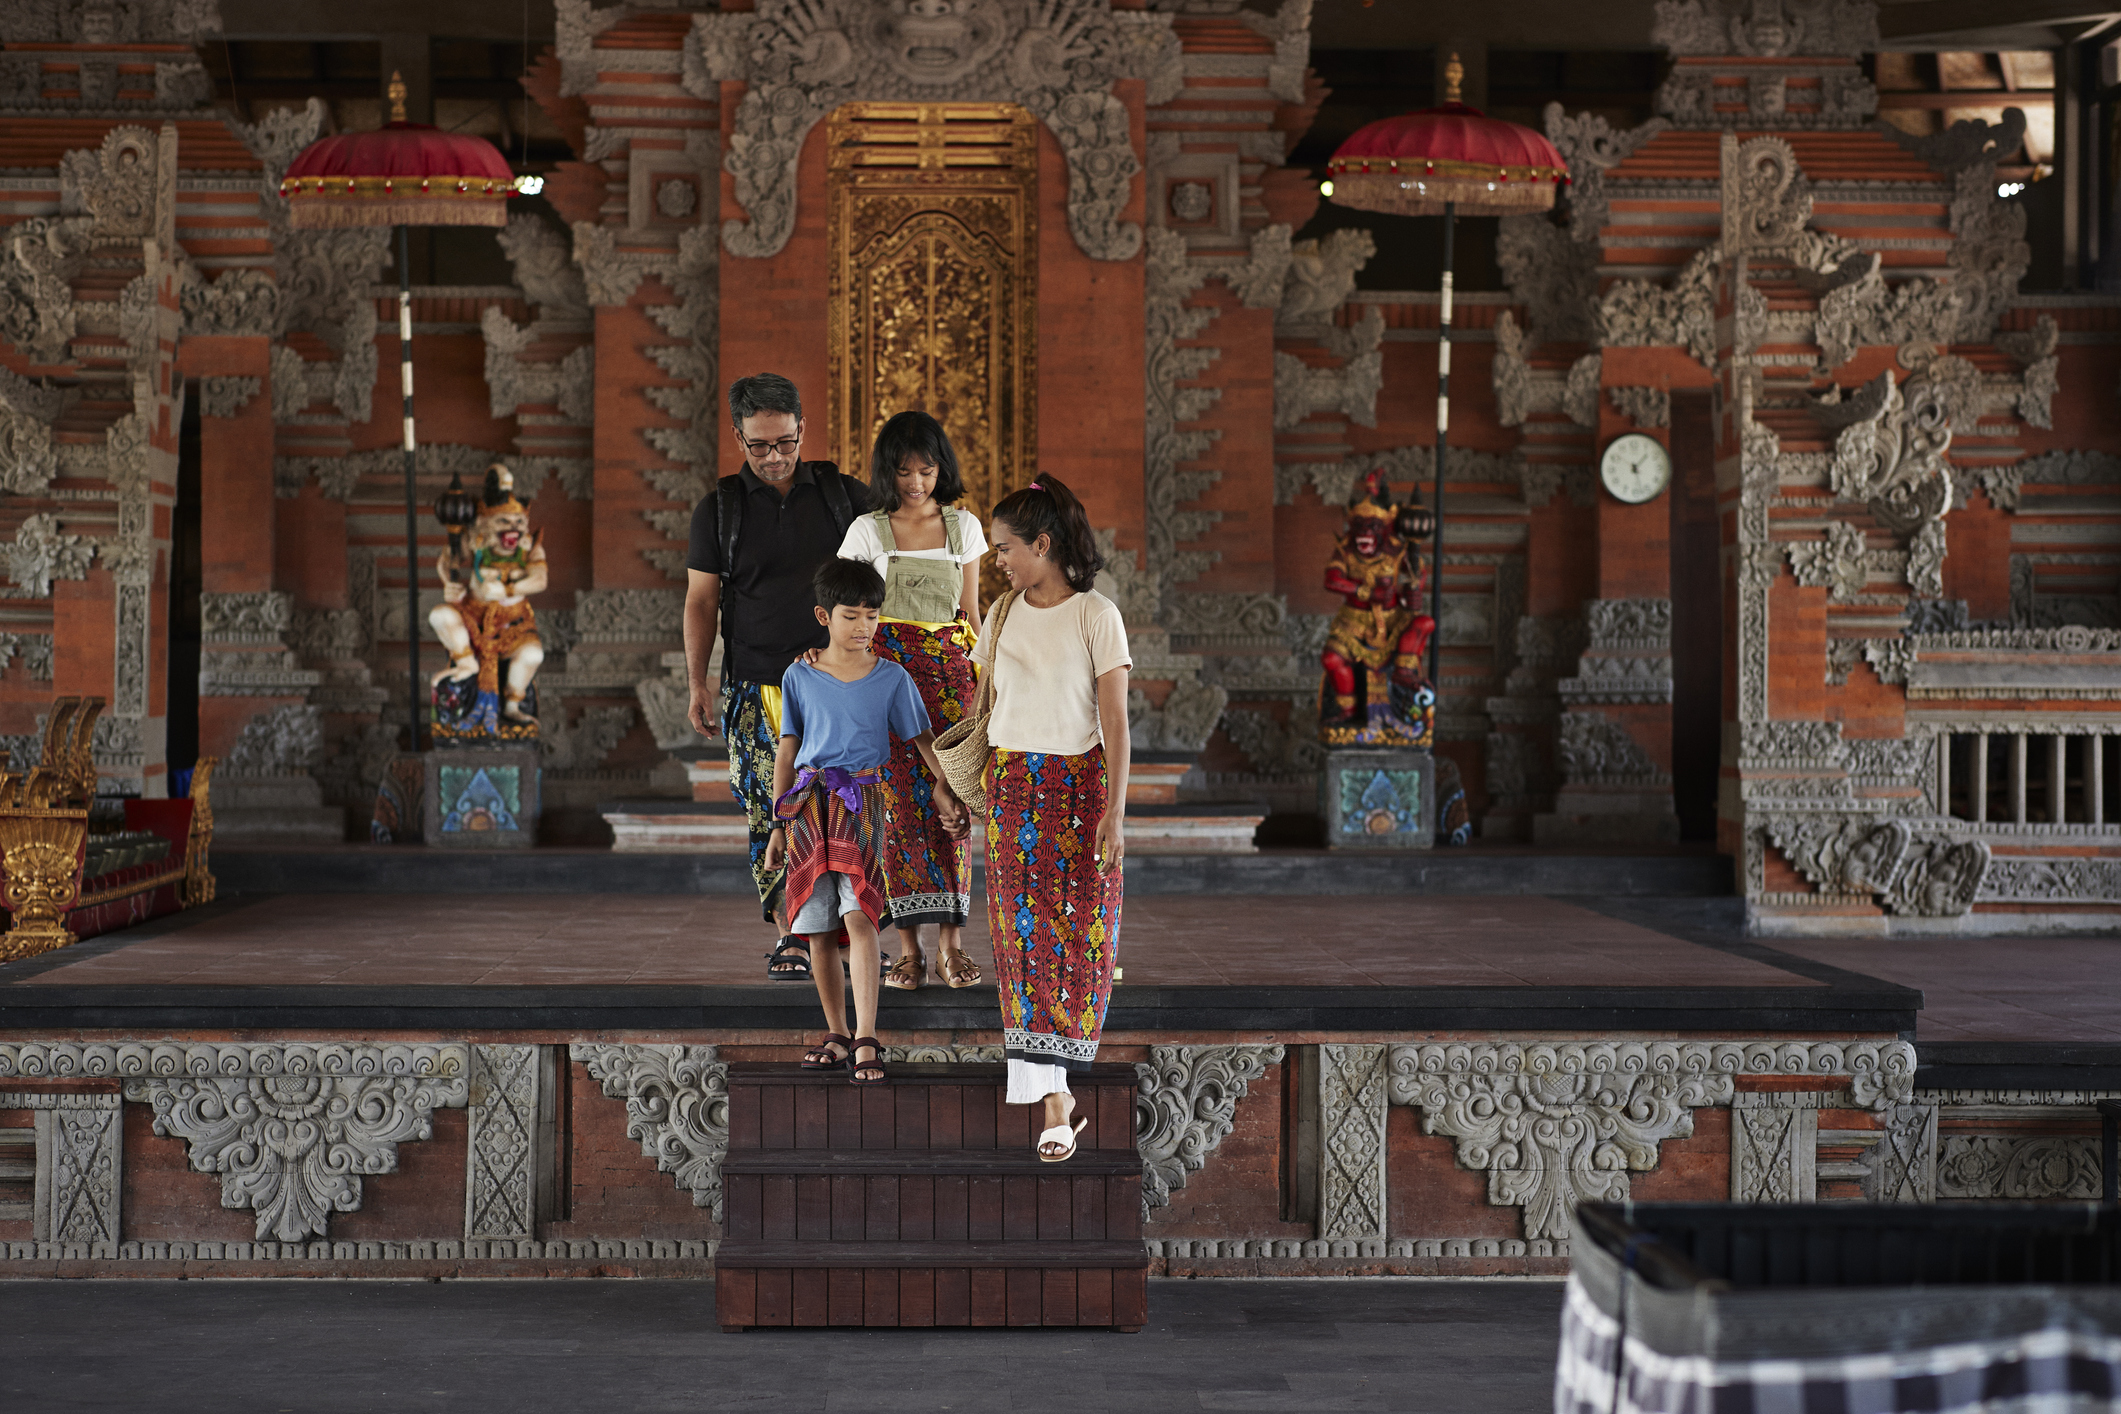 Family with a son and daughter moving down temple stairs in Ubud, Indonesia